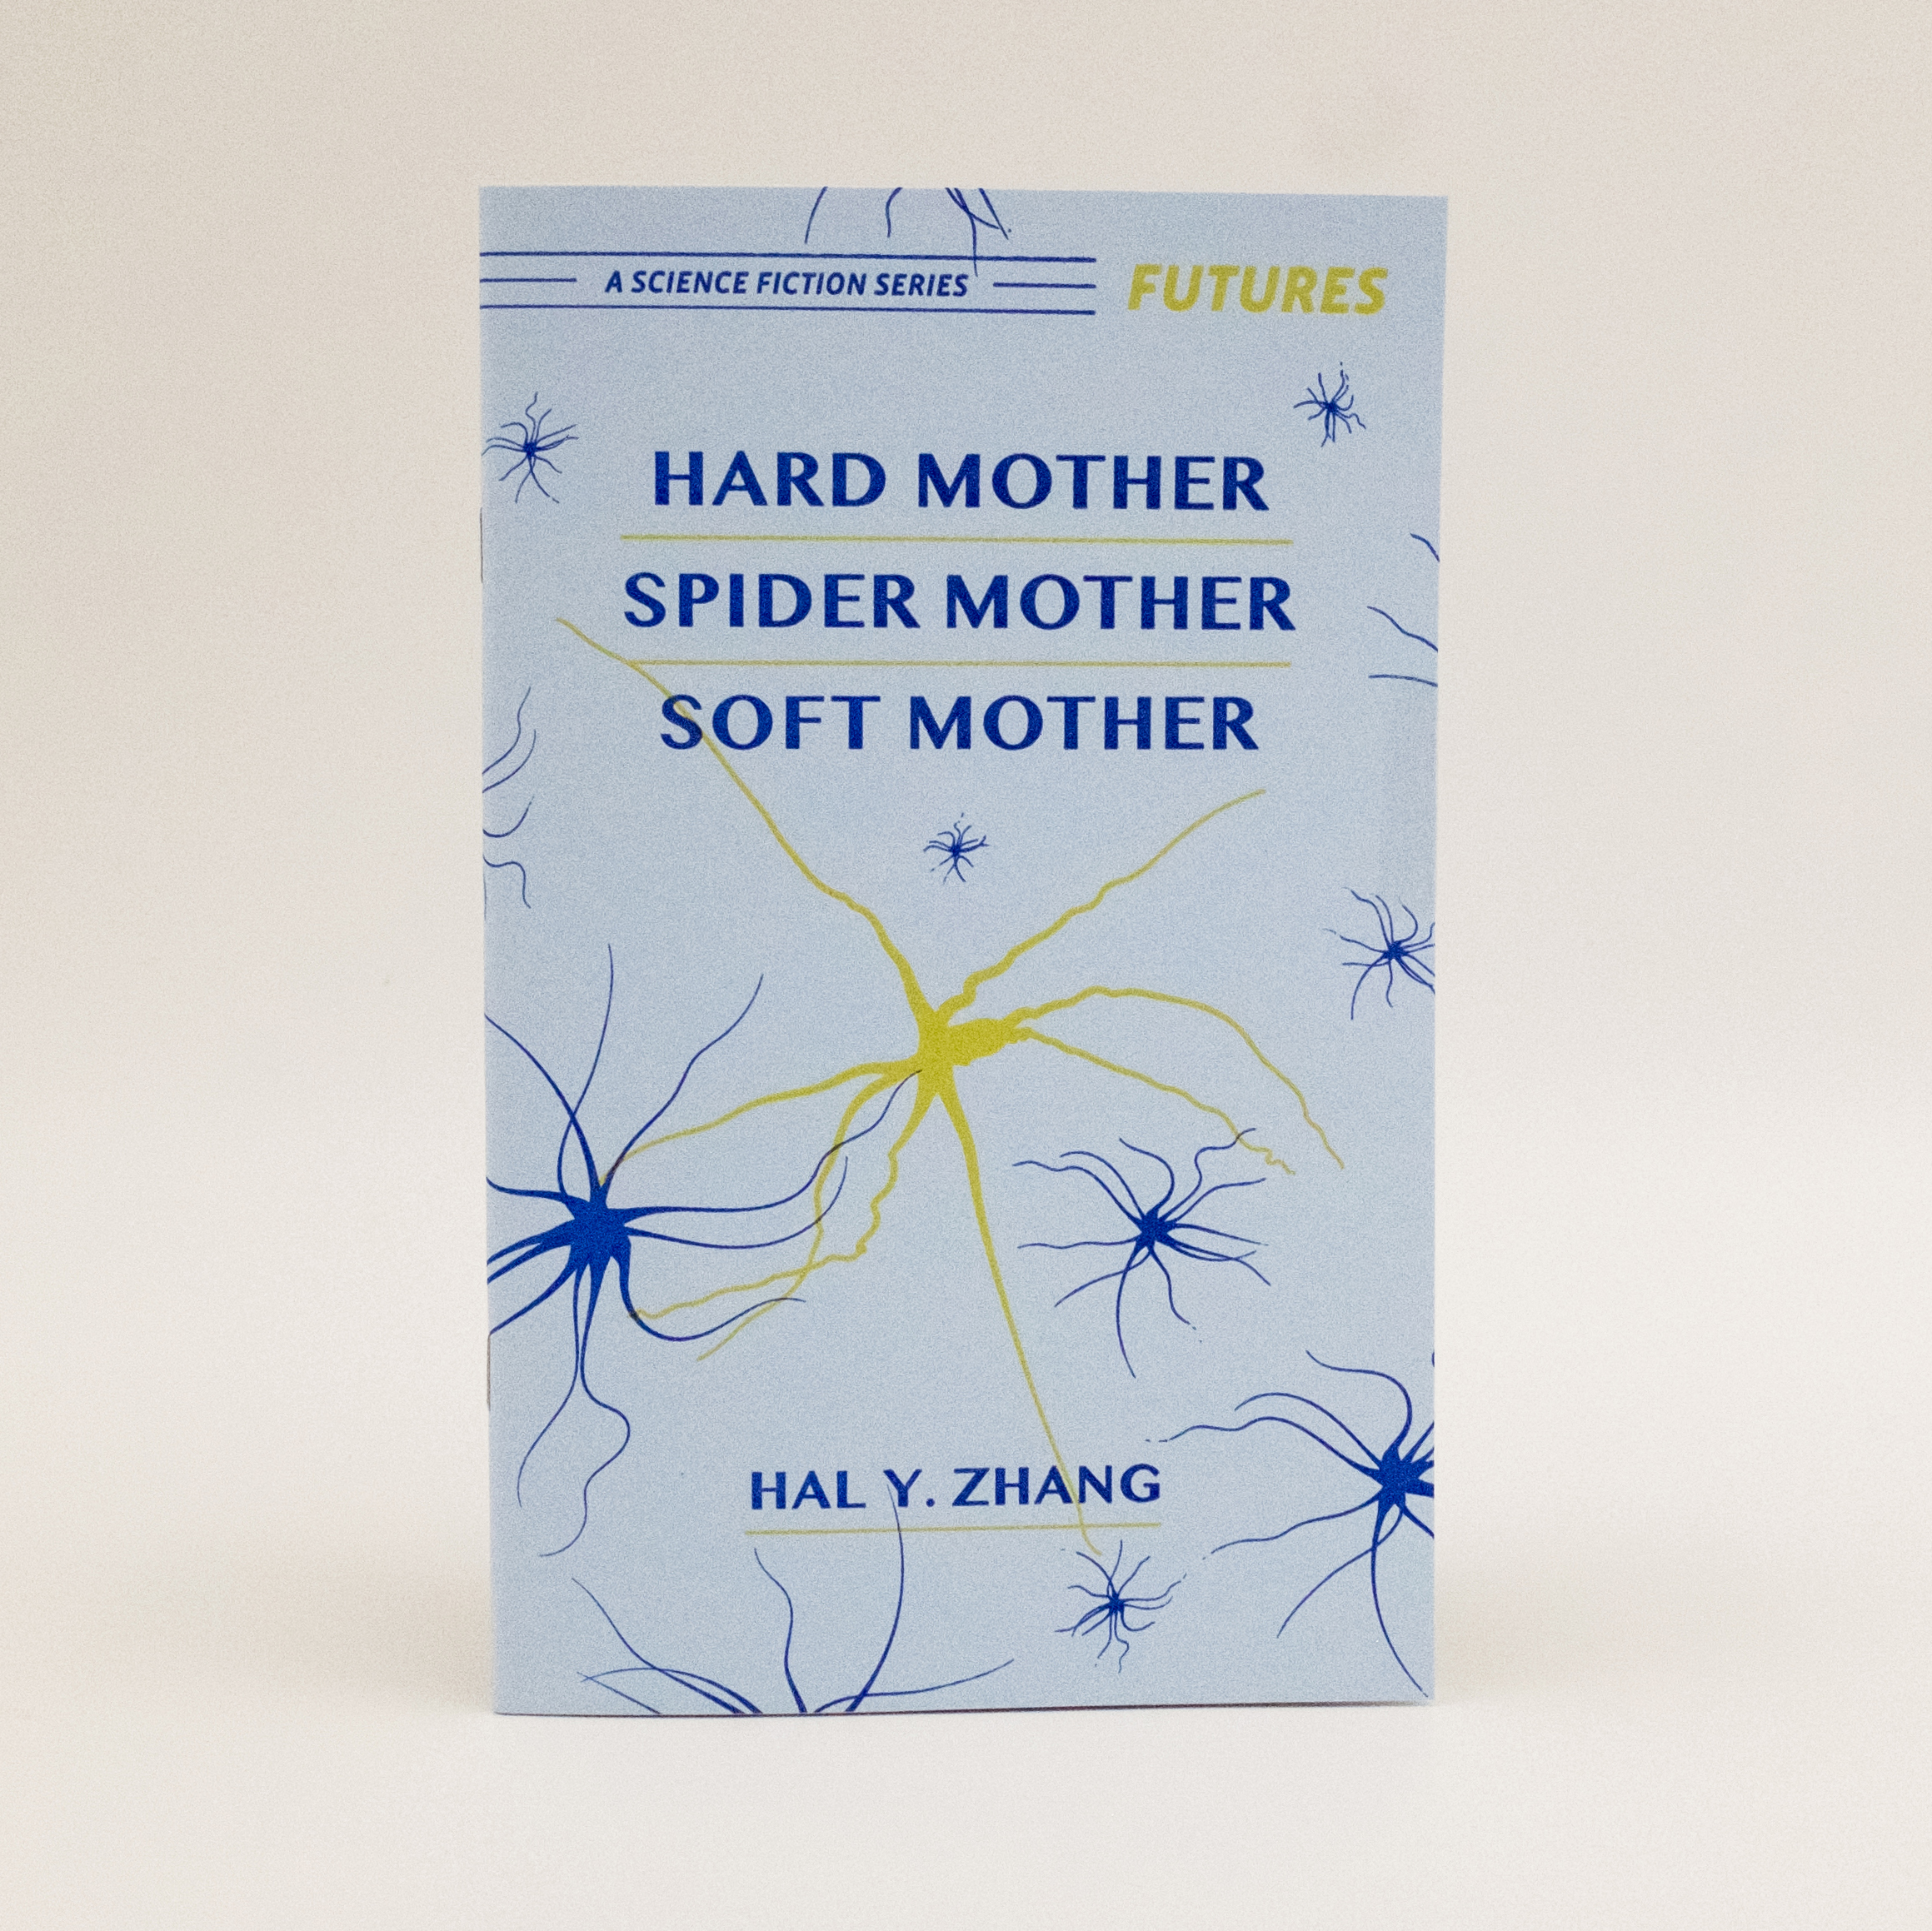 Hard Mother, Spider Mother, Soft Mother by Hal Y. Zhang